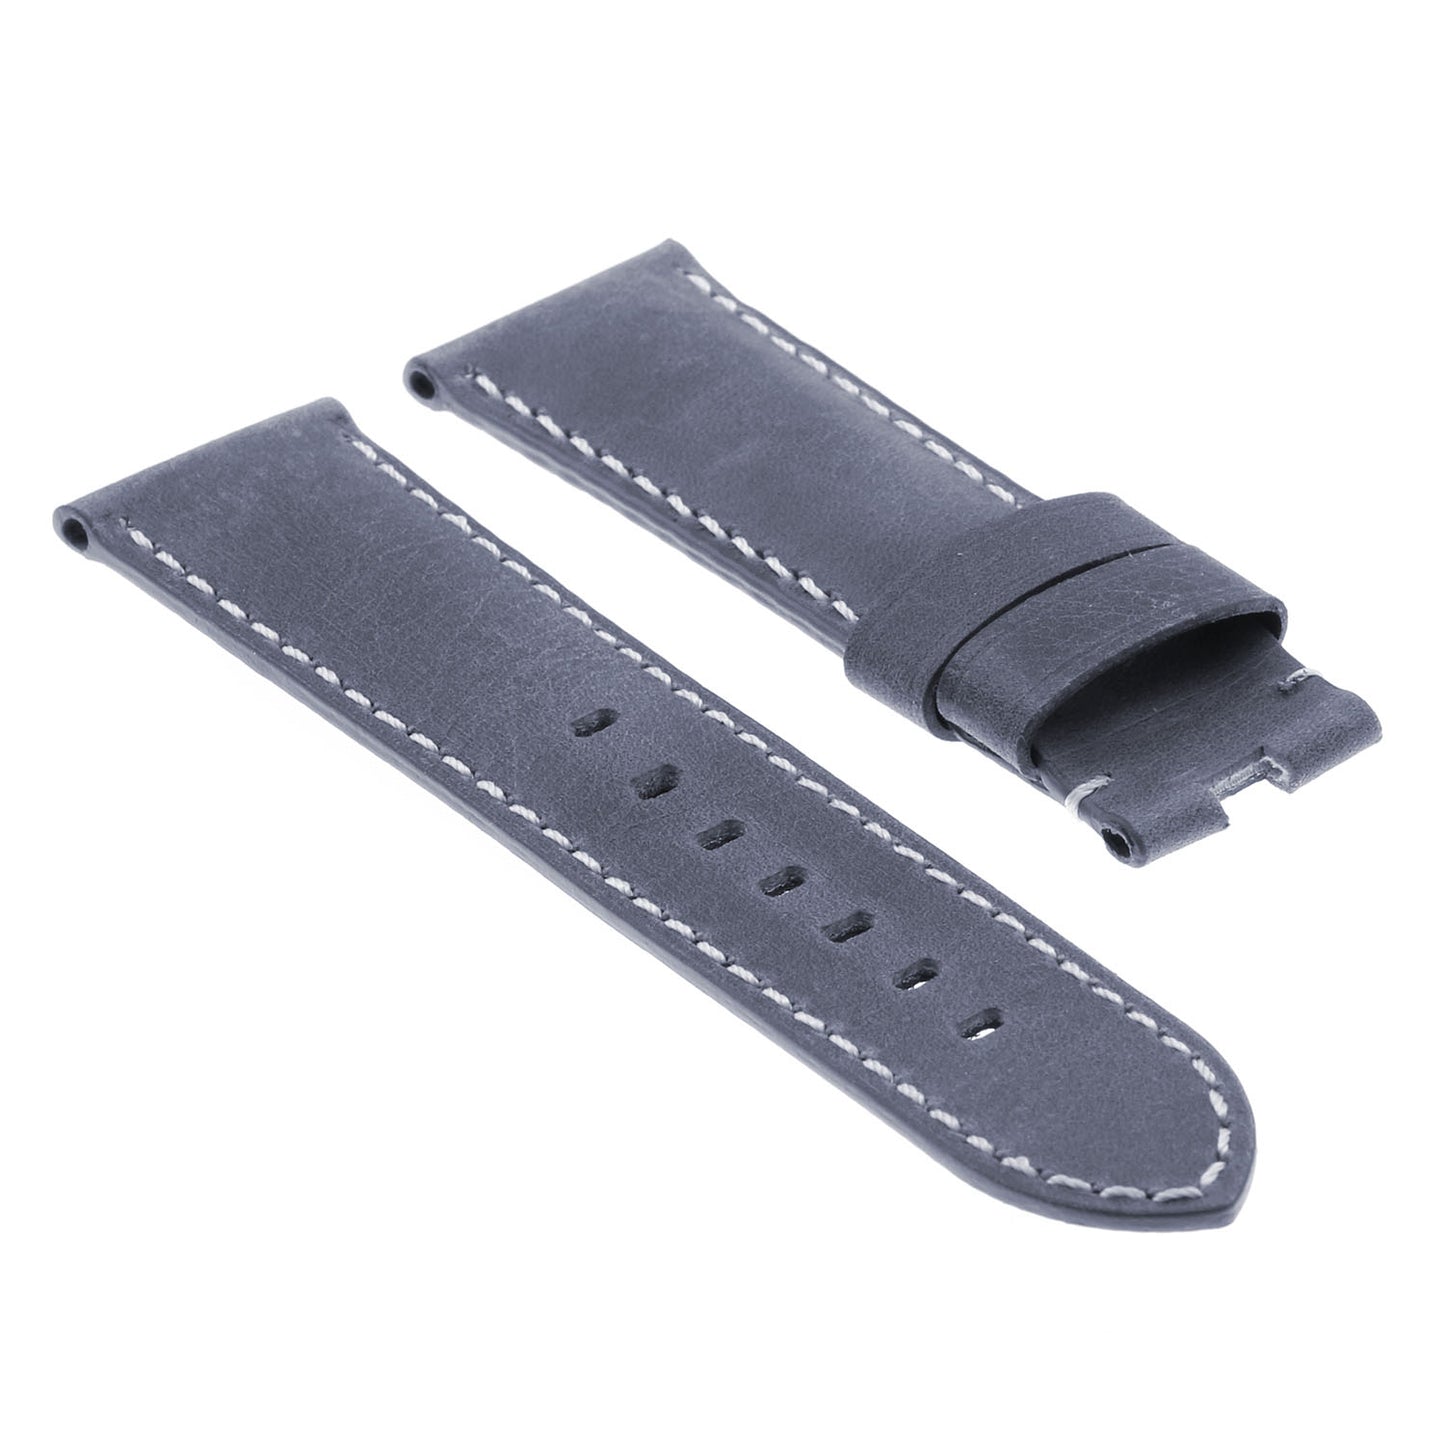 DASSARI Vintage Leather Strap for Deployant Clasp - Oyster Blue